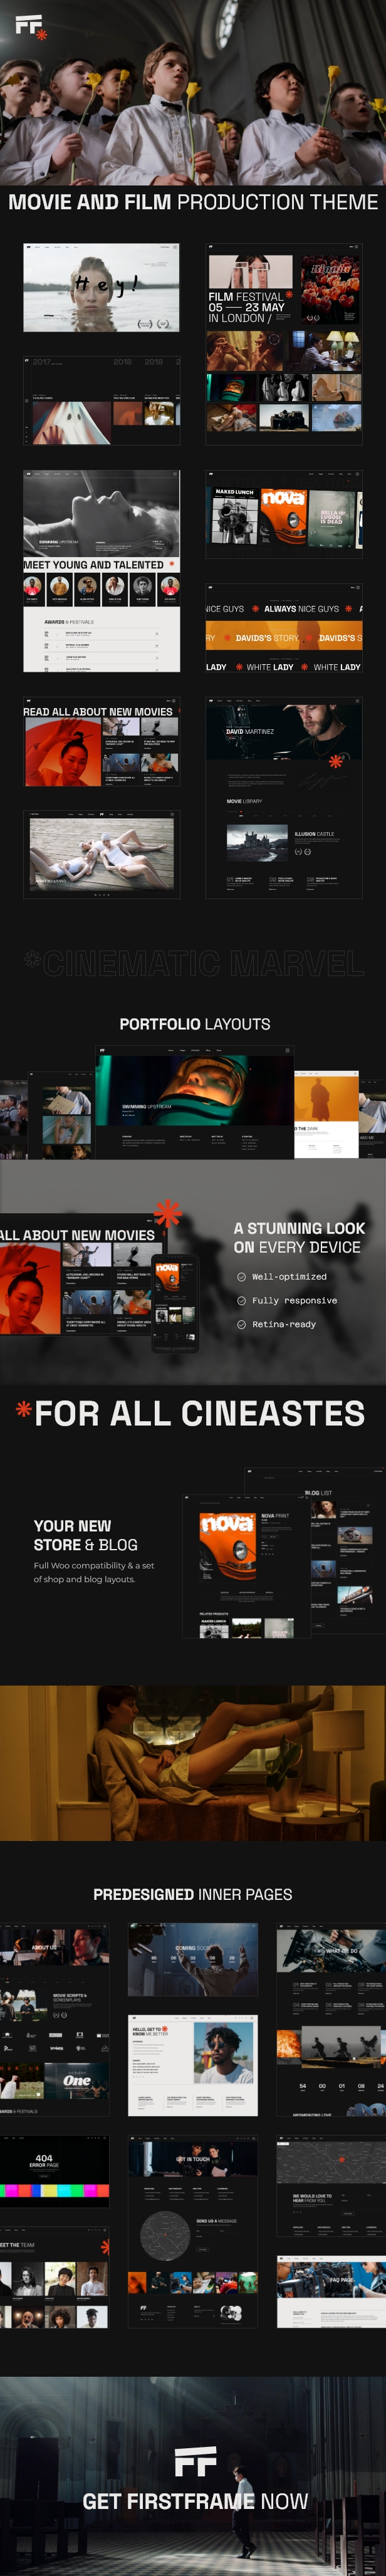 FirstFrame - Movie and Film Production Theme - 2